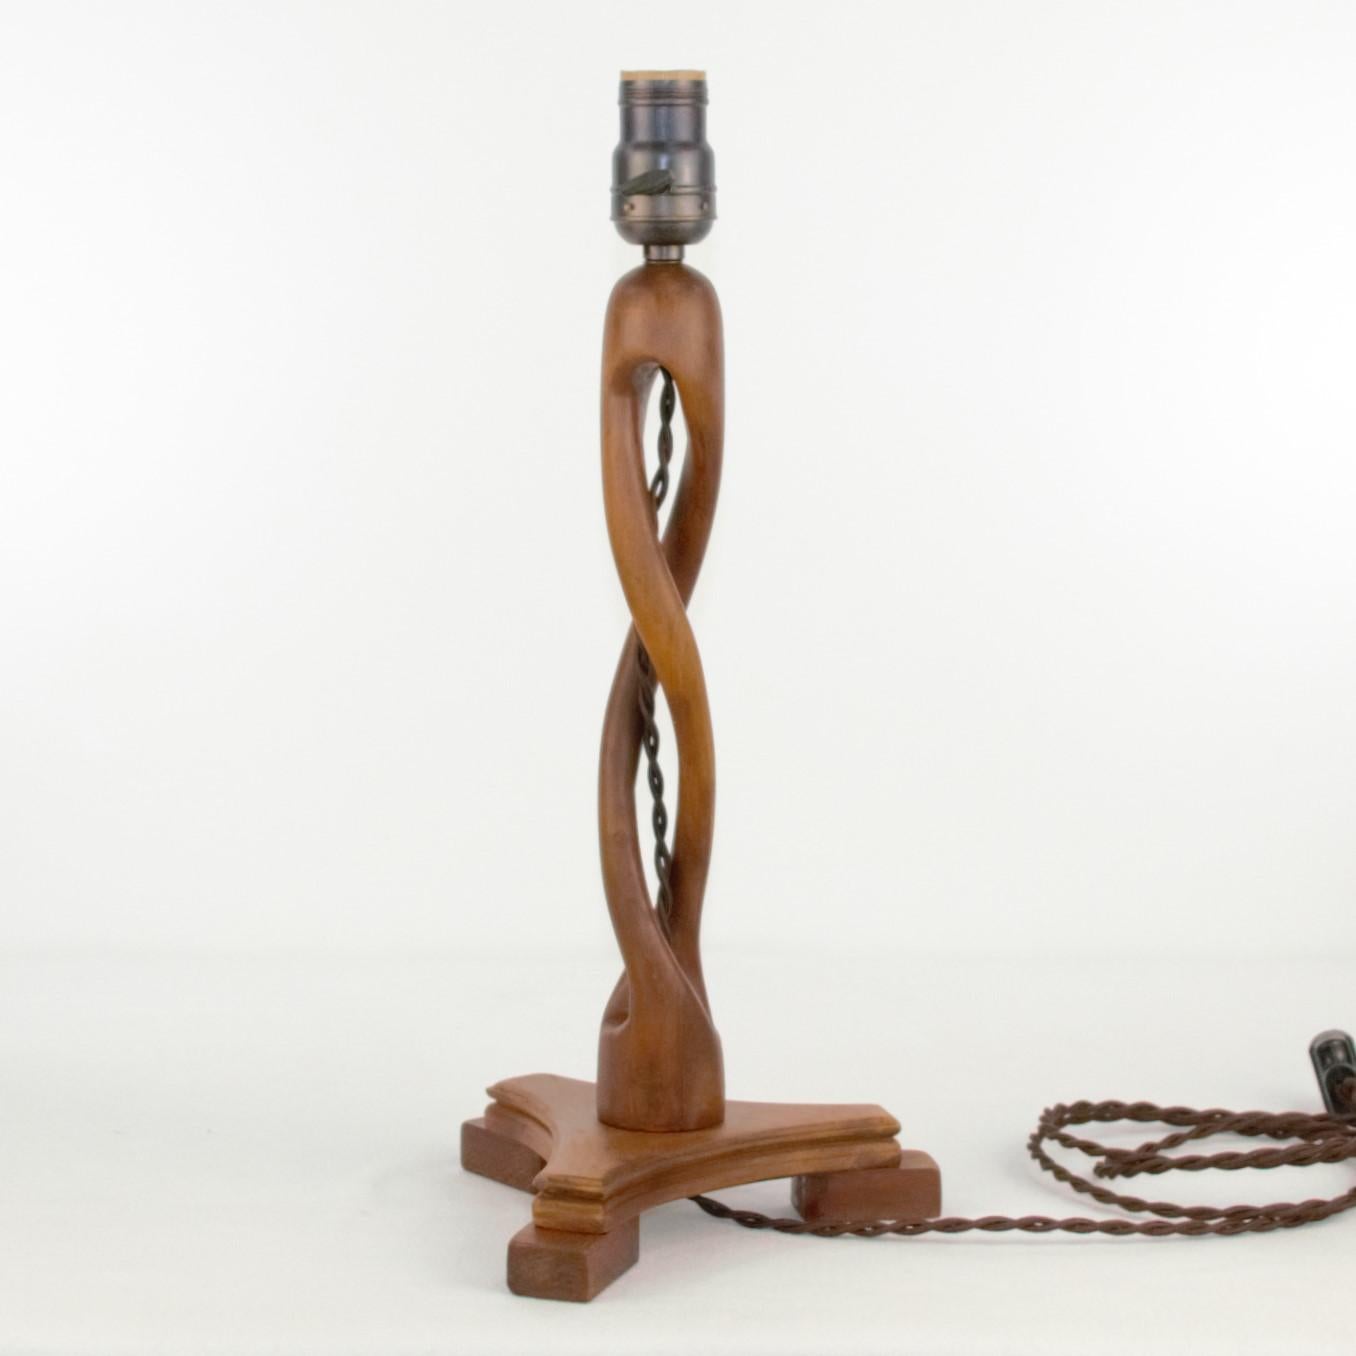 An unusual artisan made wood table lamp, carved out of one piece of wood. The maker painstakingly carved thru the wood creating two distinct twists that rise from the base and finish in a soft round top. We have waxed the wood to help preserve the